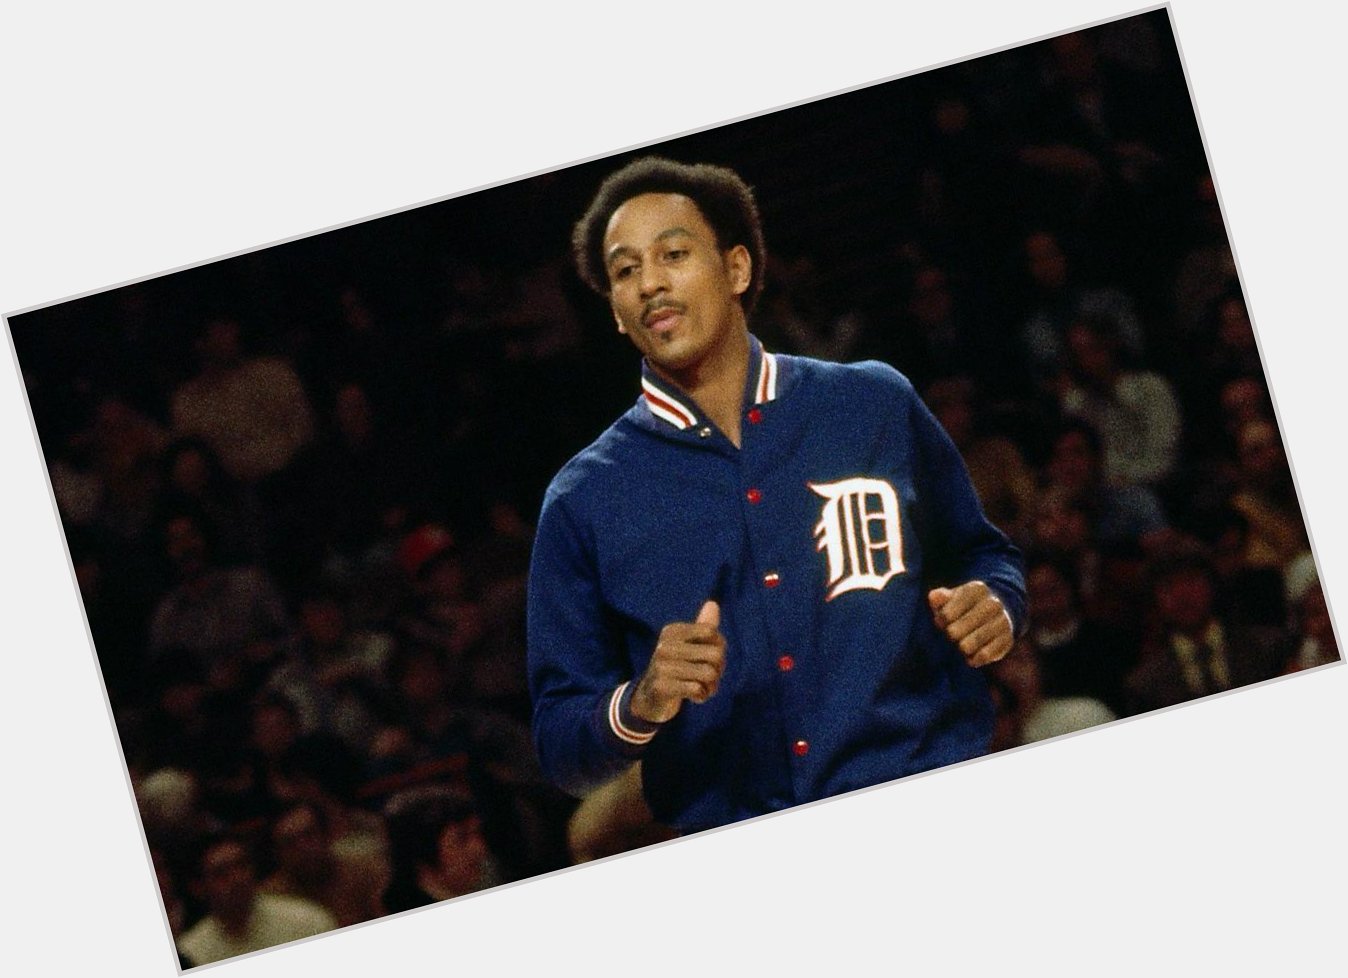 Happy Birthday, Dave Bing! 

Celebrate with a look back at his Hall of Fame career:  